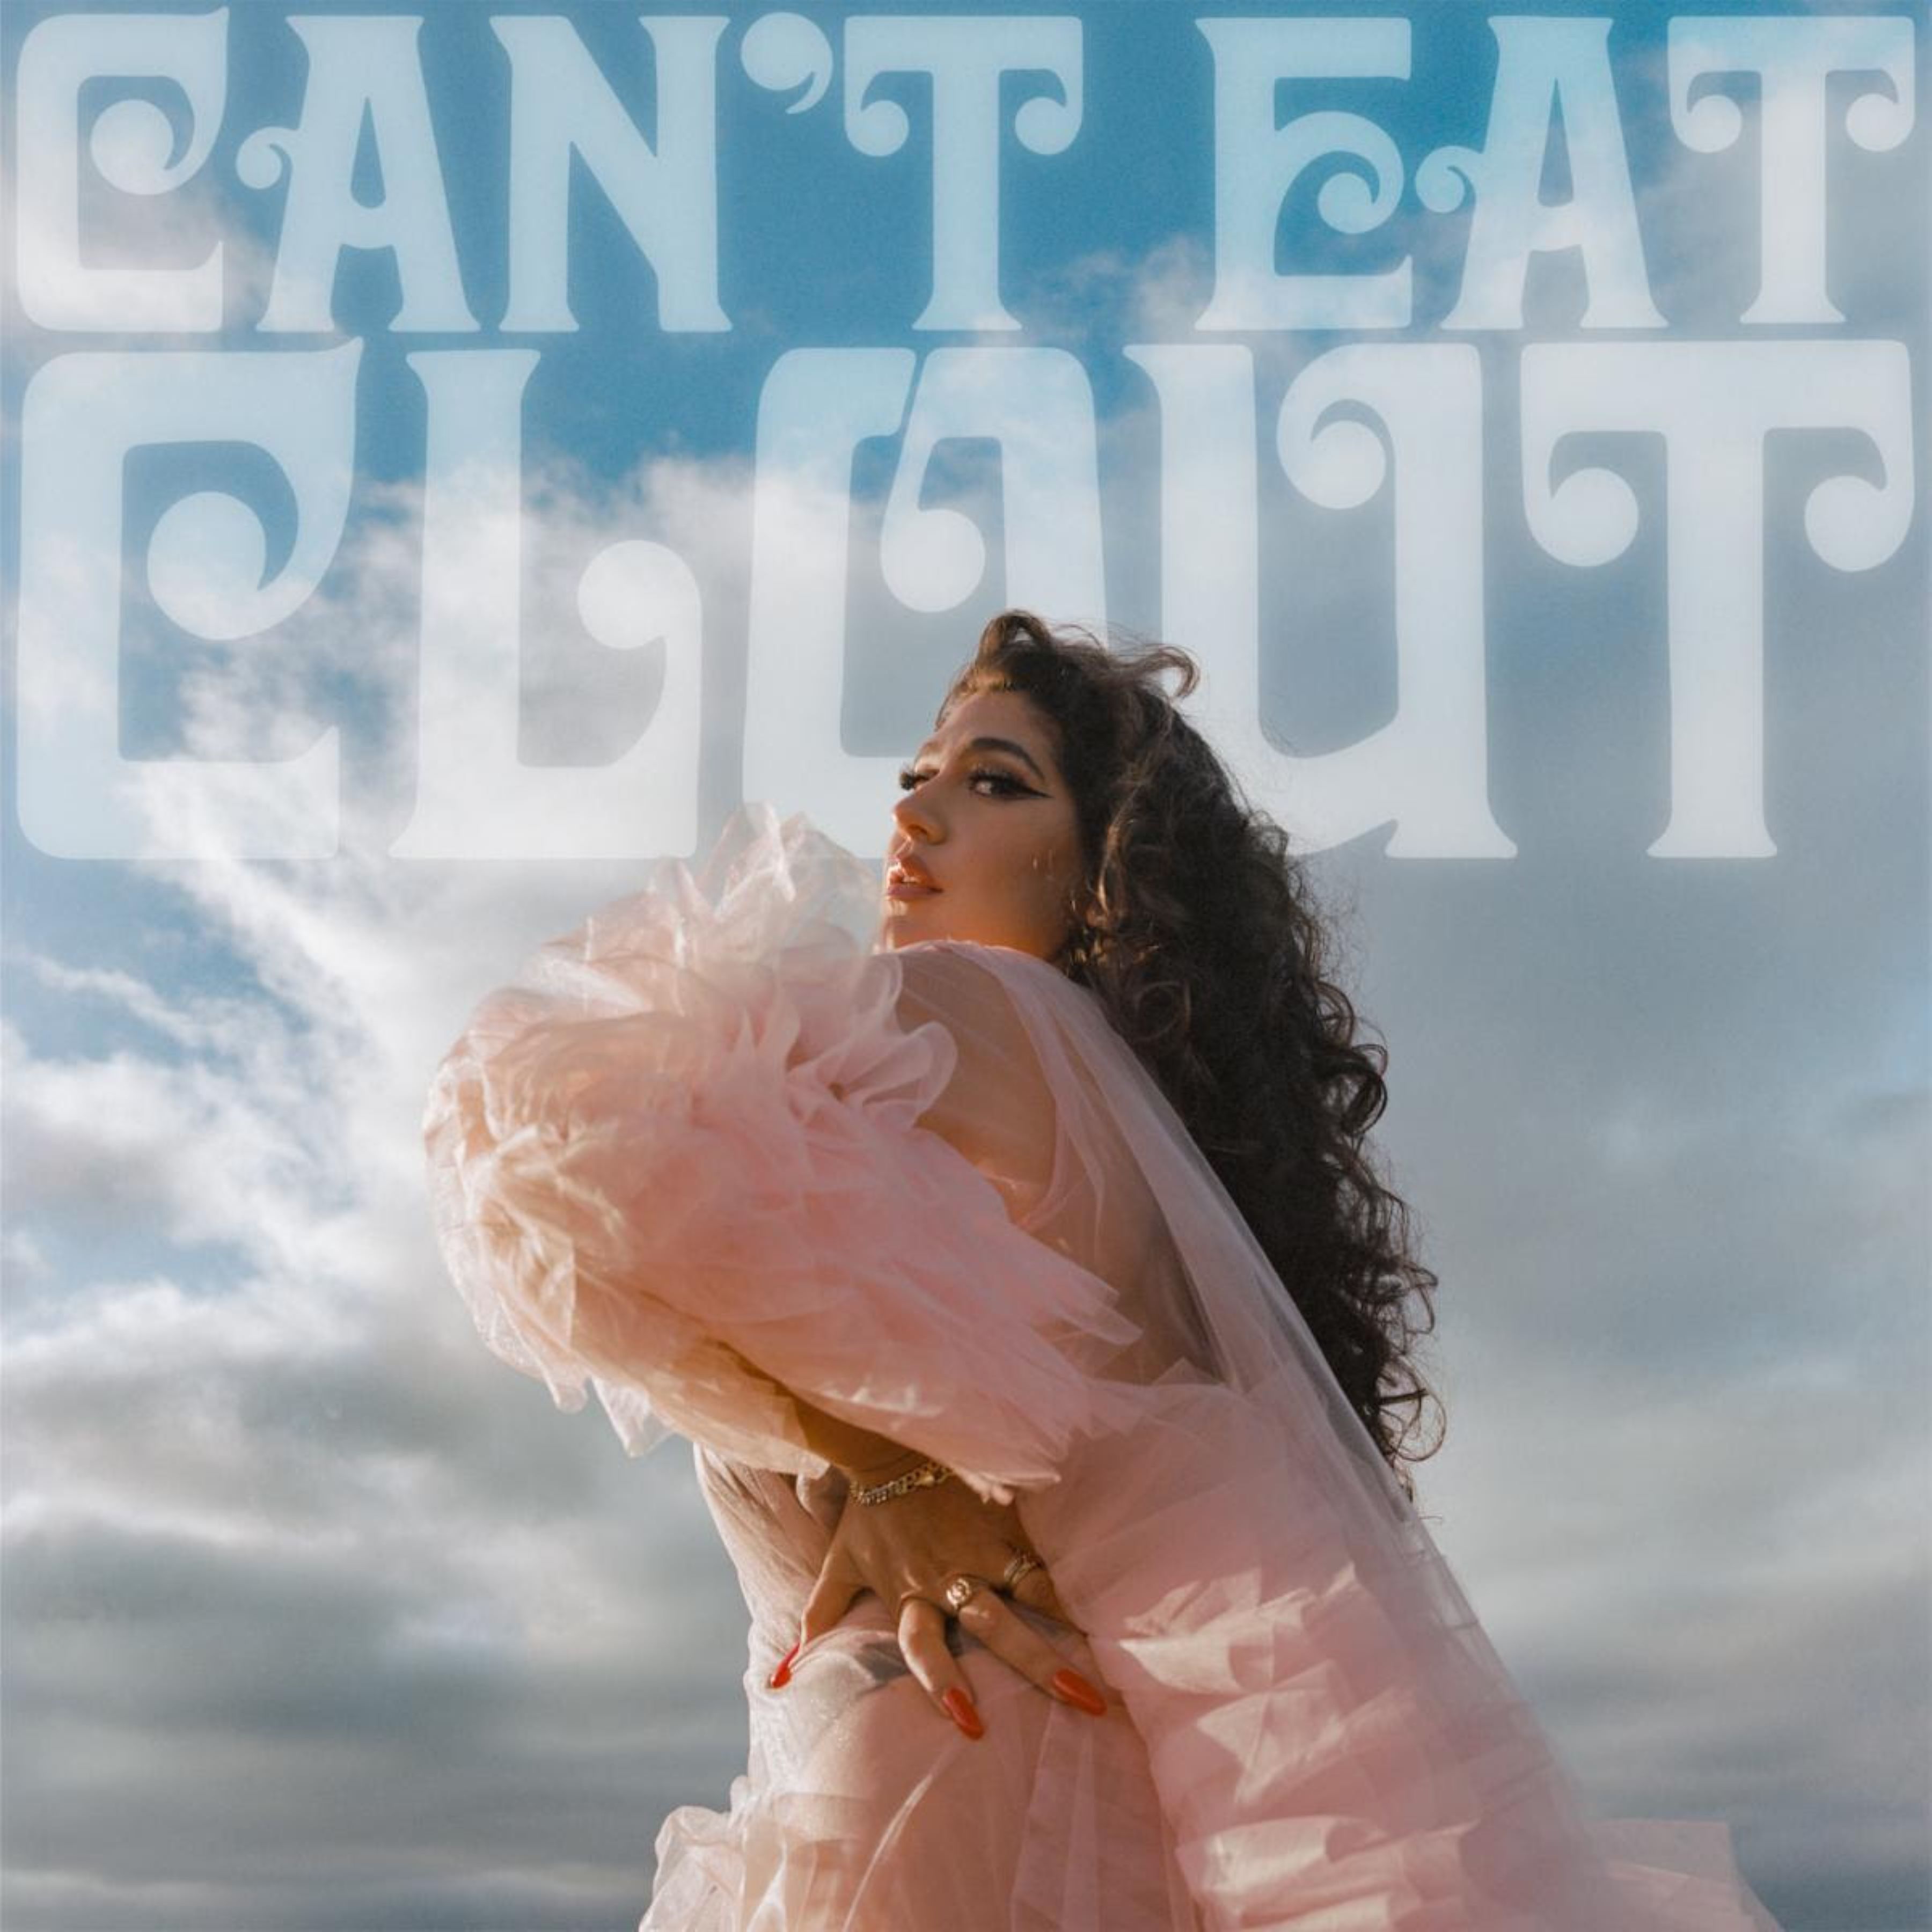 LA DOÑA SHARES NEW VIDEO FOR TITLE TRACK “CAN'T EAT CLOUT” - SCOOPE